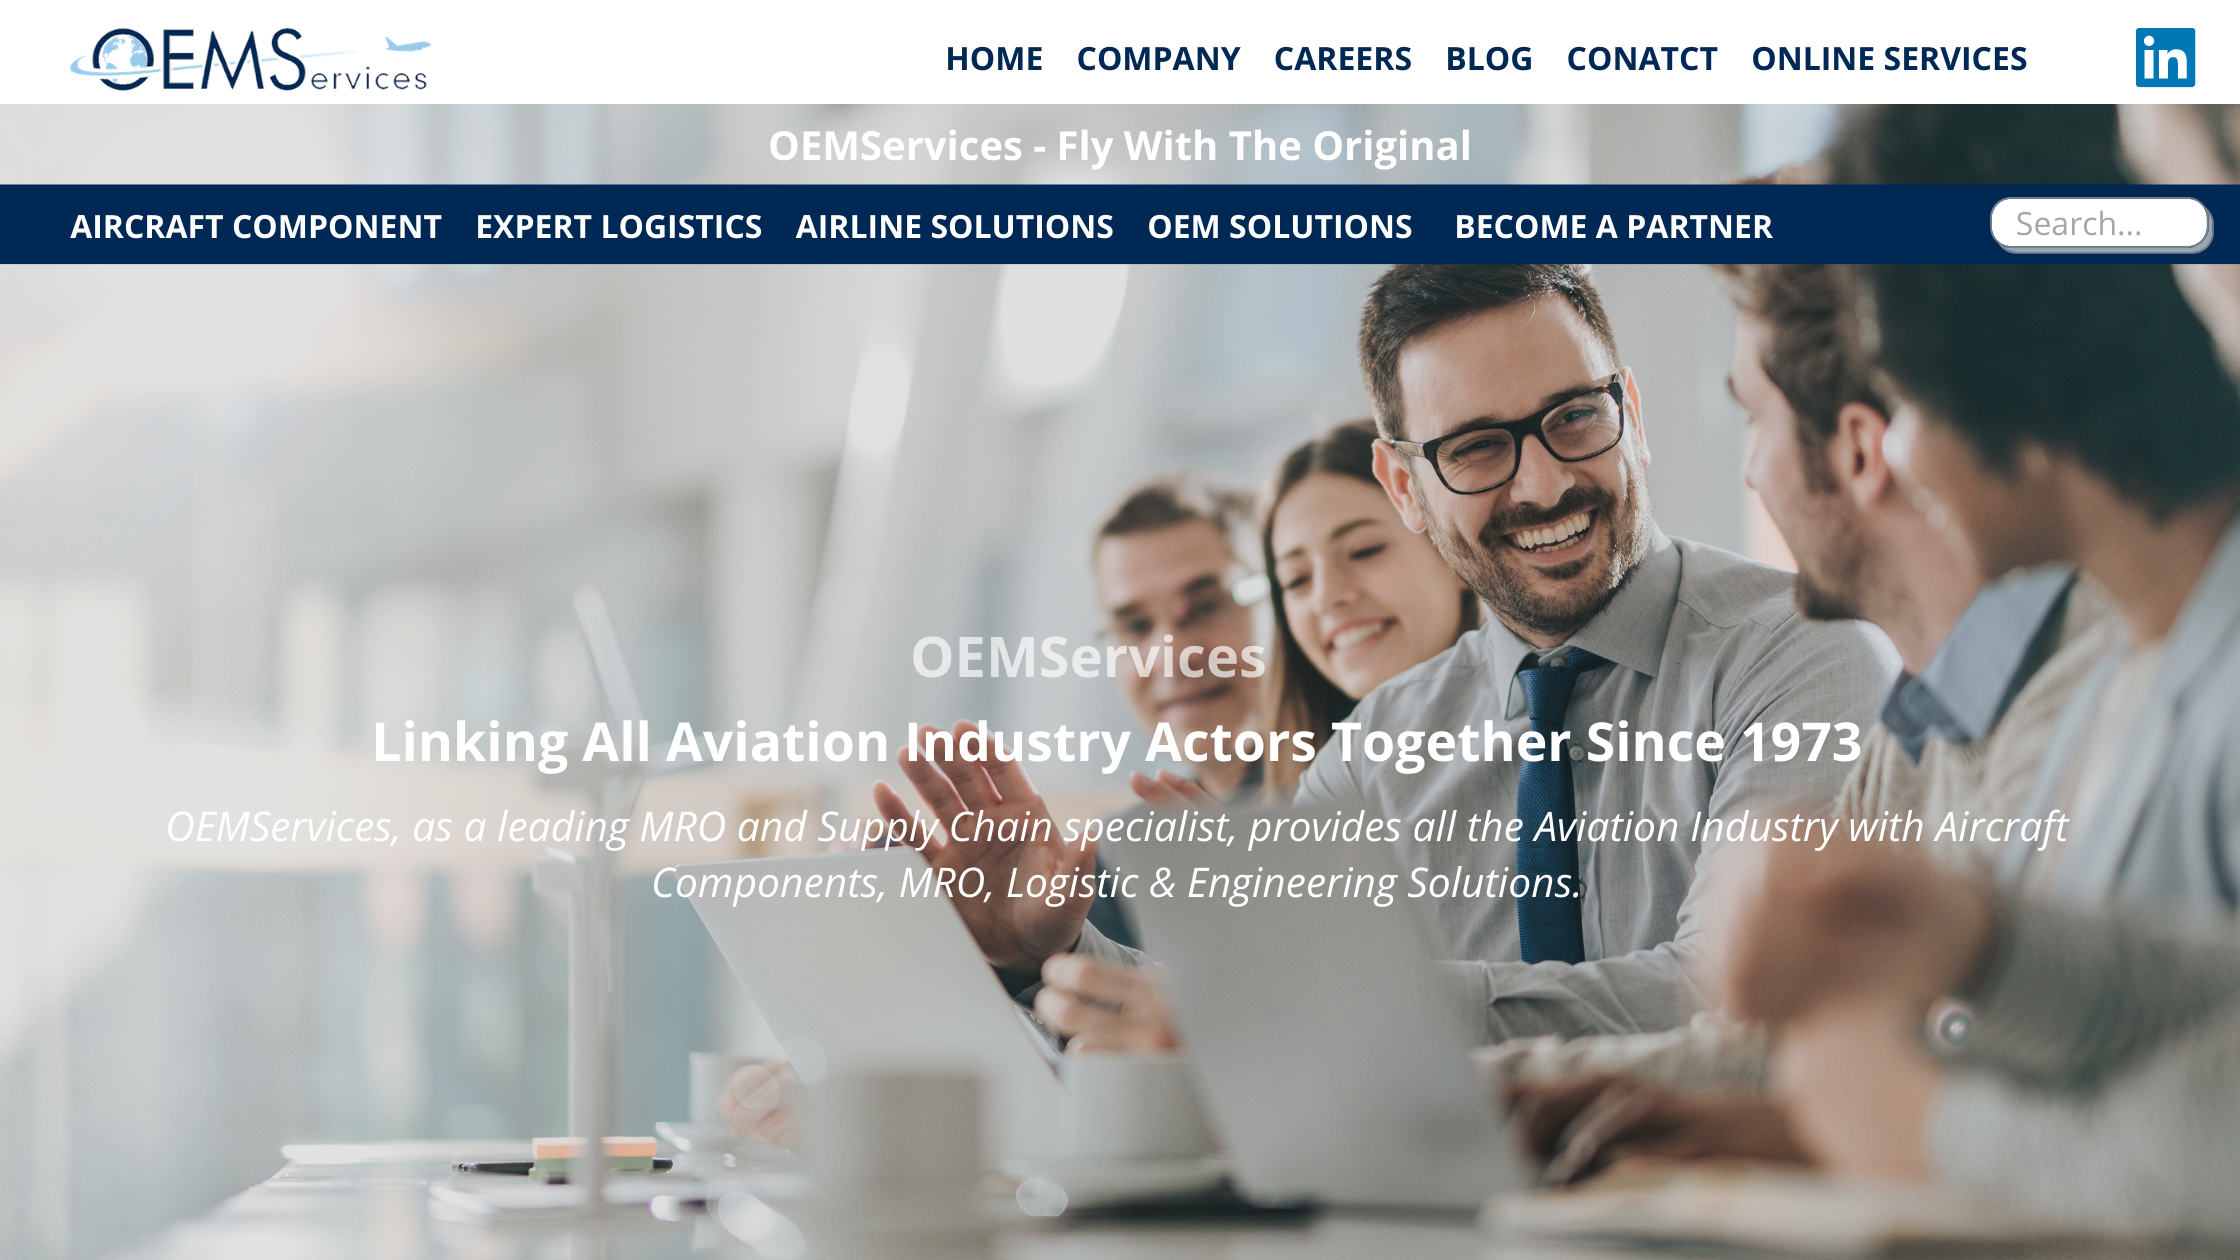 OEMServices launches new website